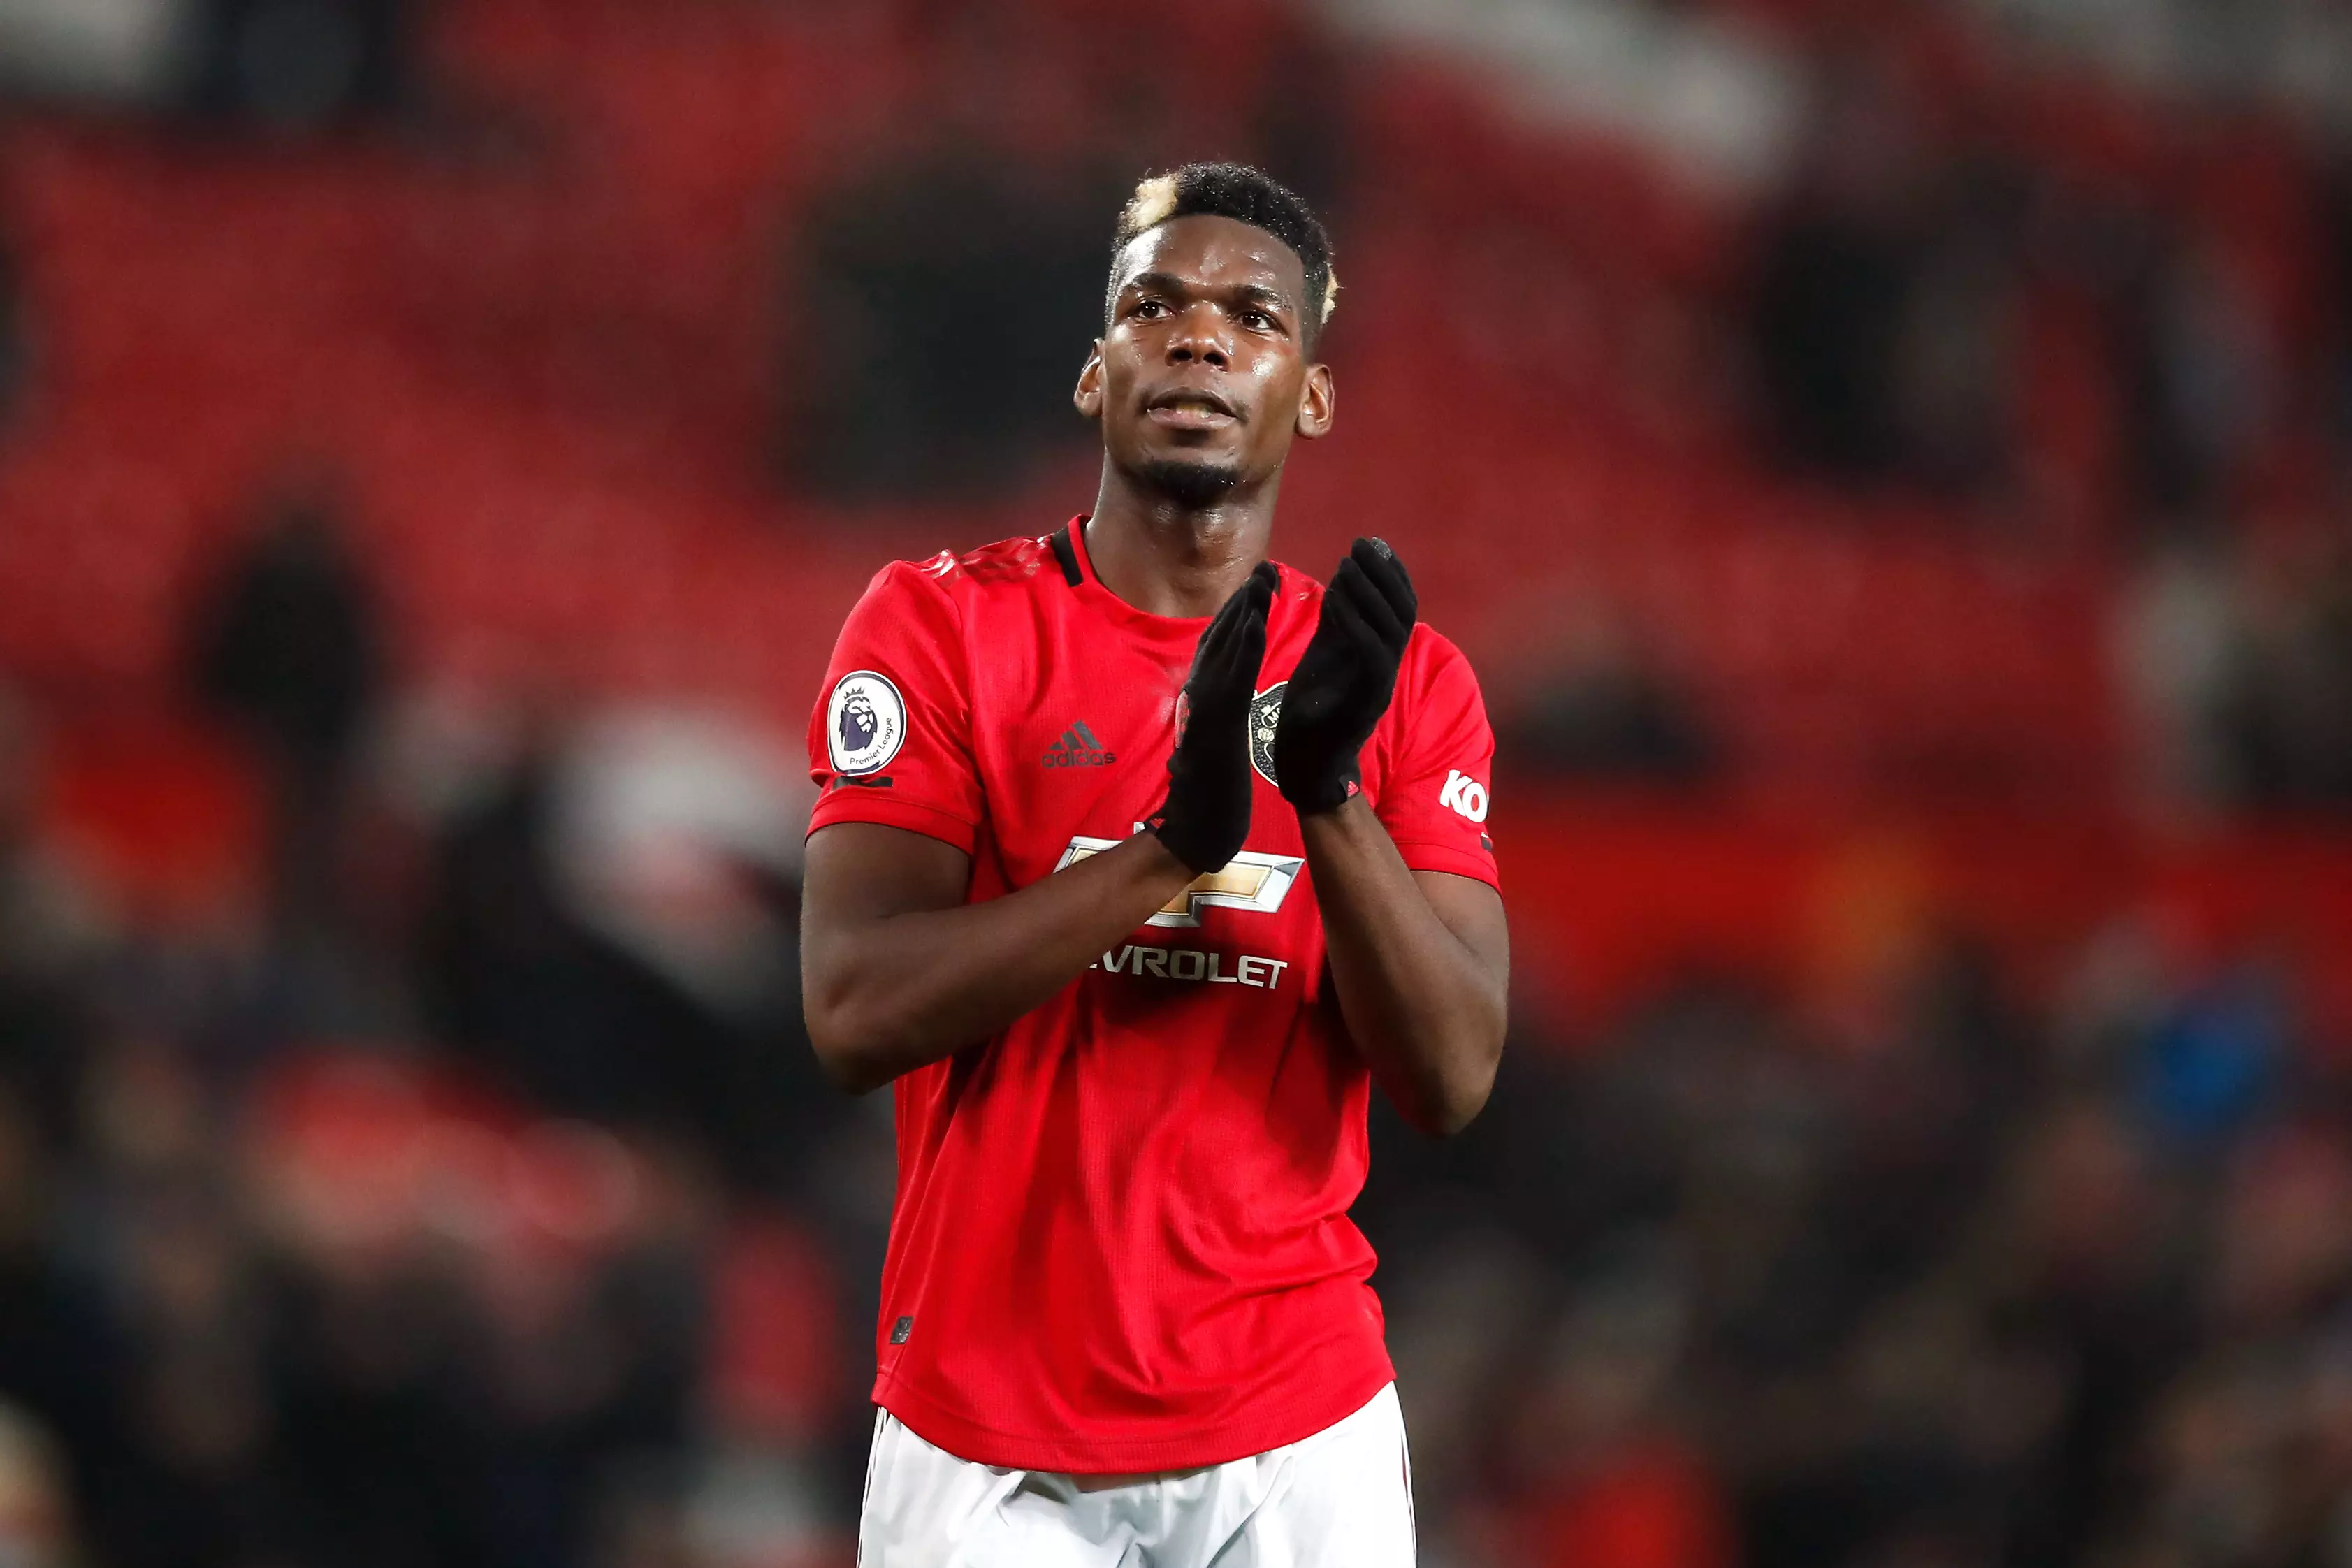 Paul Pogba counts as a homegrown player, despite being French, by having moved to Manchester United at a young age. Image: PA Images